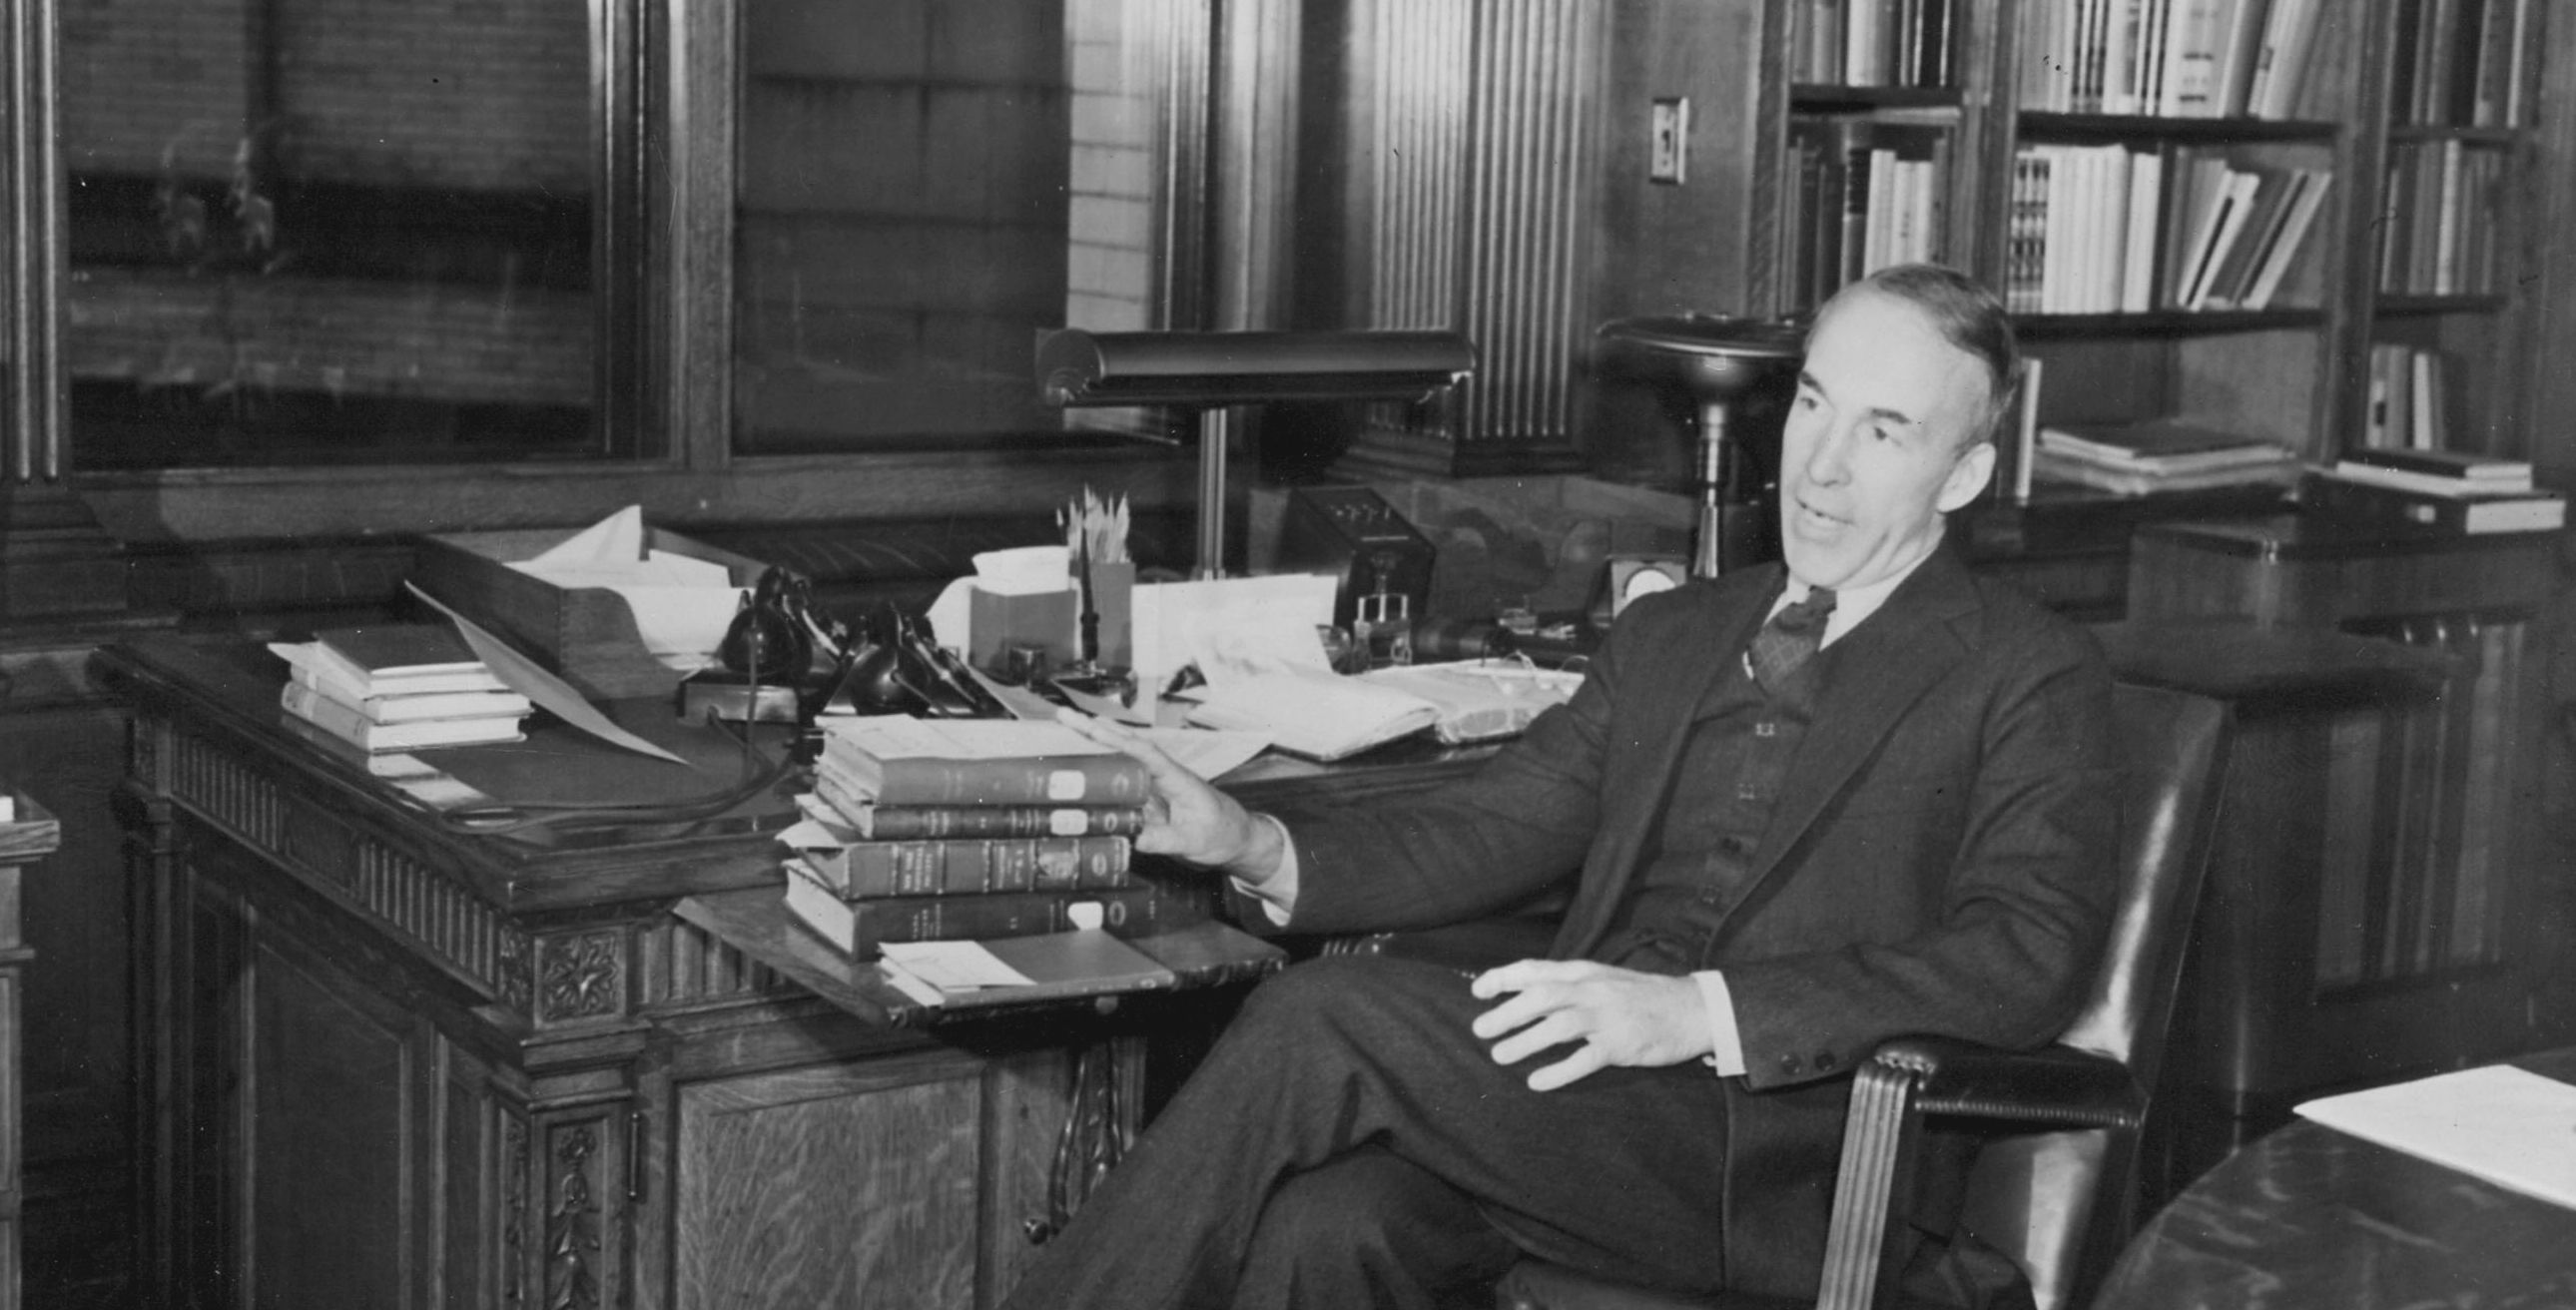 FDR tapped Archibald MacLeish to be Librarian of Congress. The famed poet teamed up with "Wild Bill" Donovan, head of the OSS, to create an operation to collect information on Nazi activities in Europe. Library of Congress.